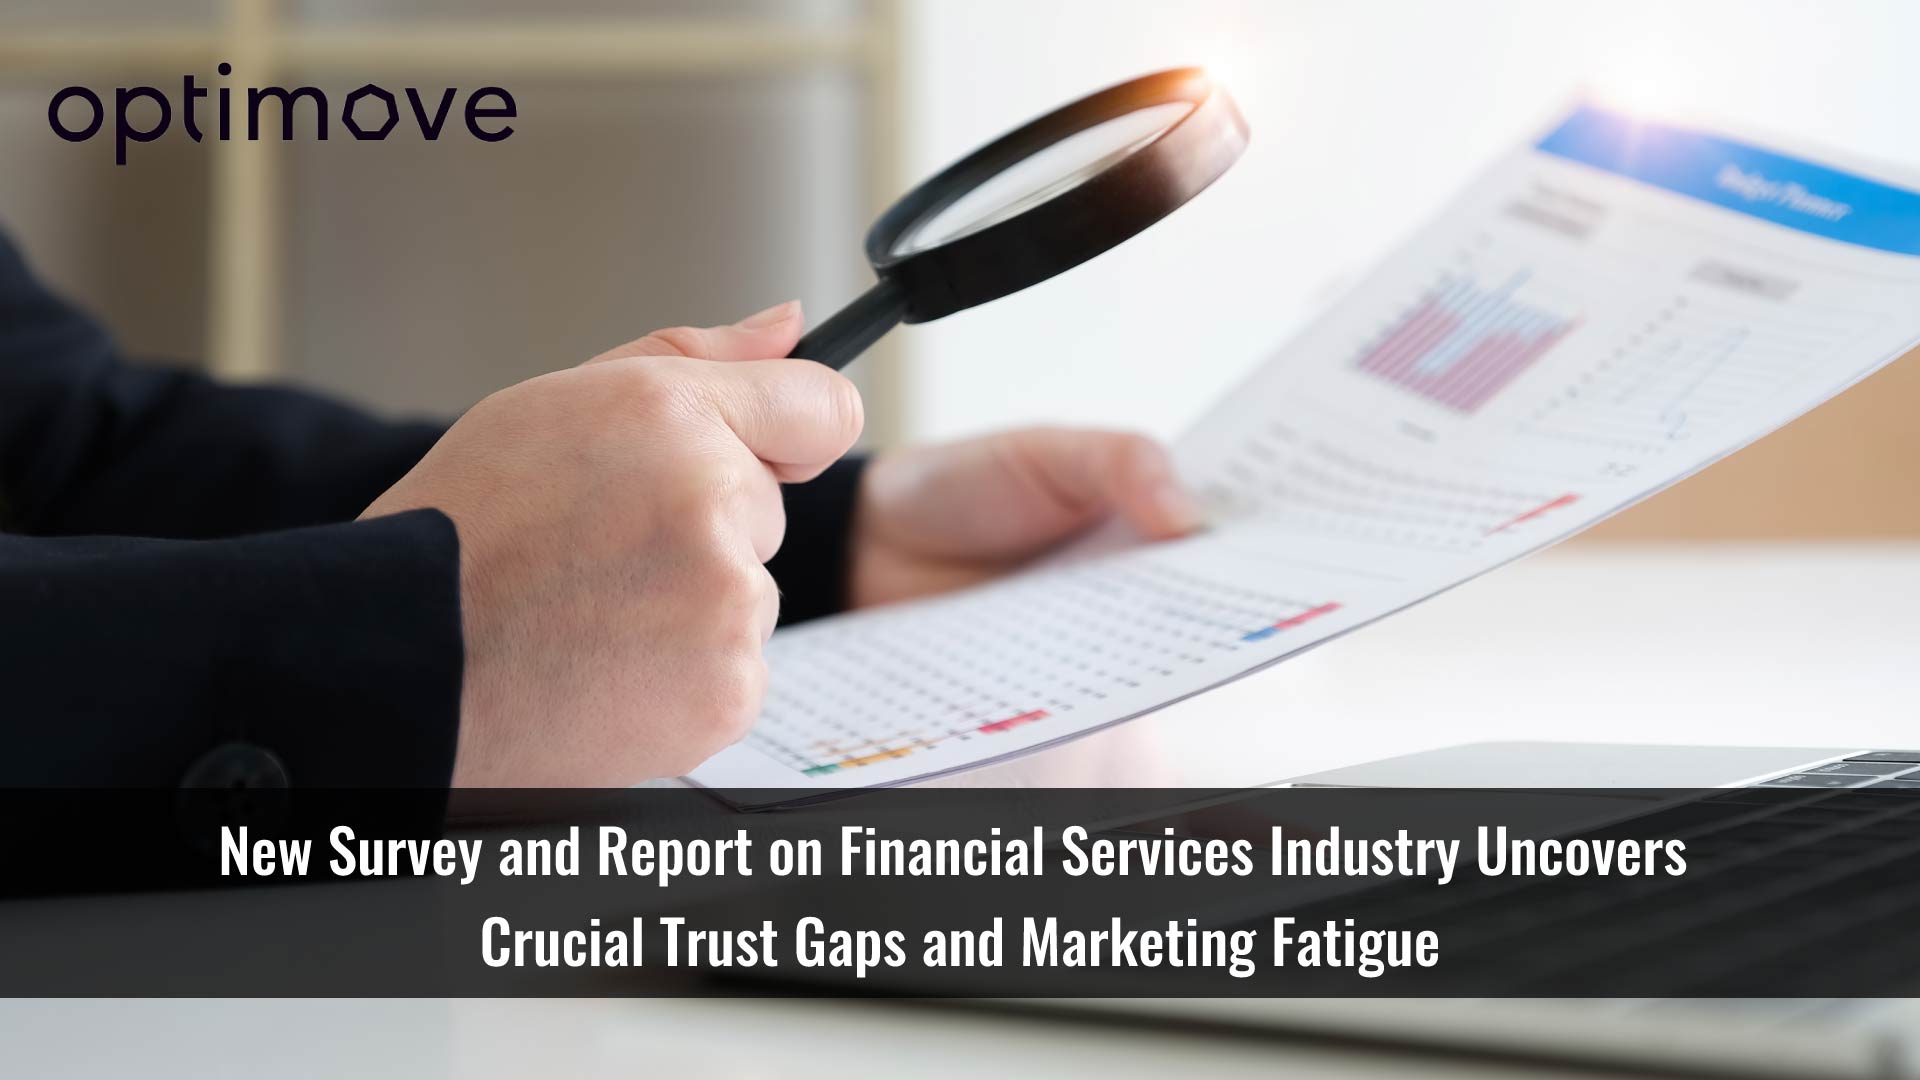 New Optimove Survey and Report on Financial Services Industry Uncovers Crucial Trust Gaps and Marketing Fatigue